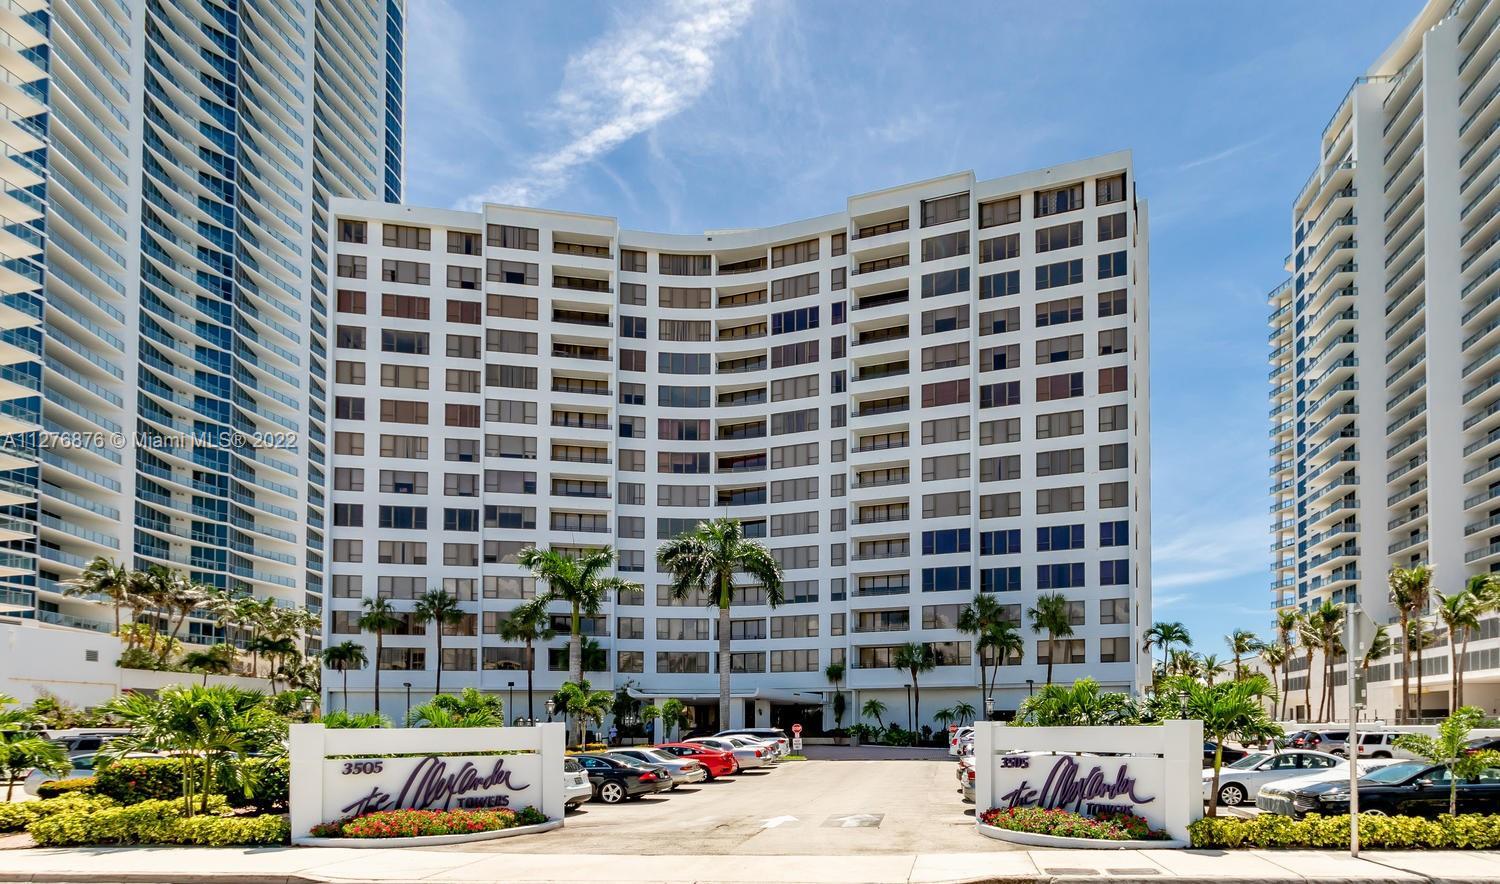 Spacious 2 Beds/2 Baths Condo on the BEACH with Intracoastal Views From Every Room! 
Biggest Floor 